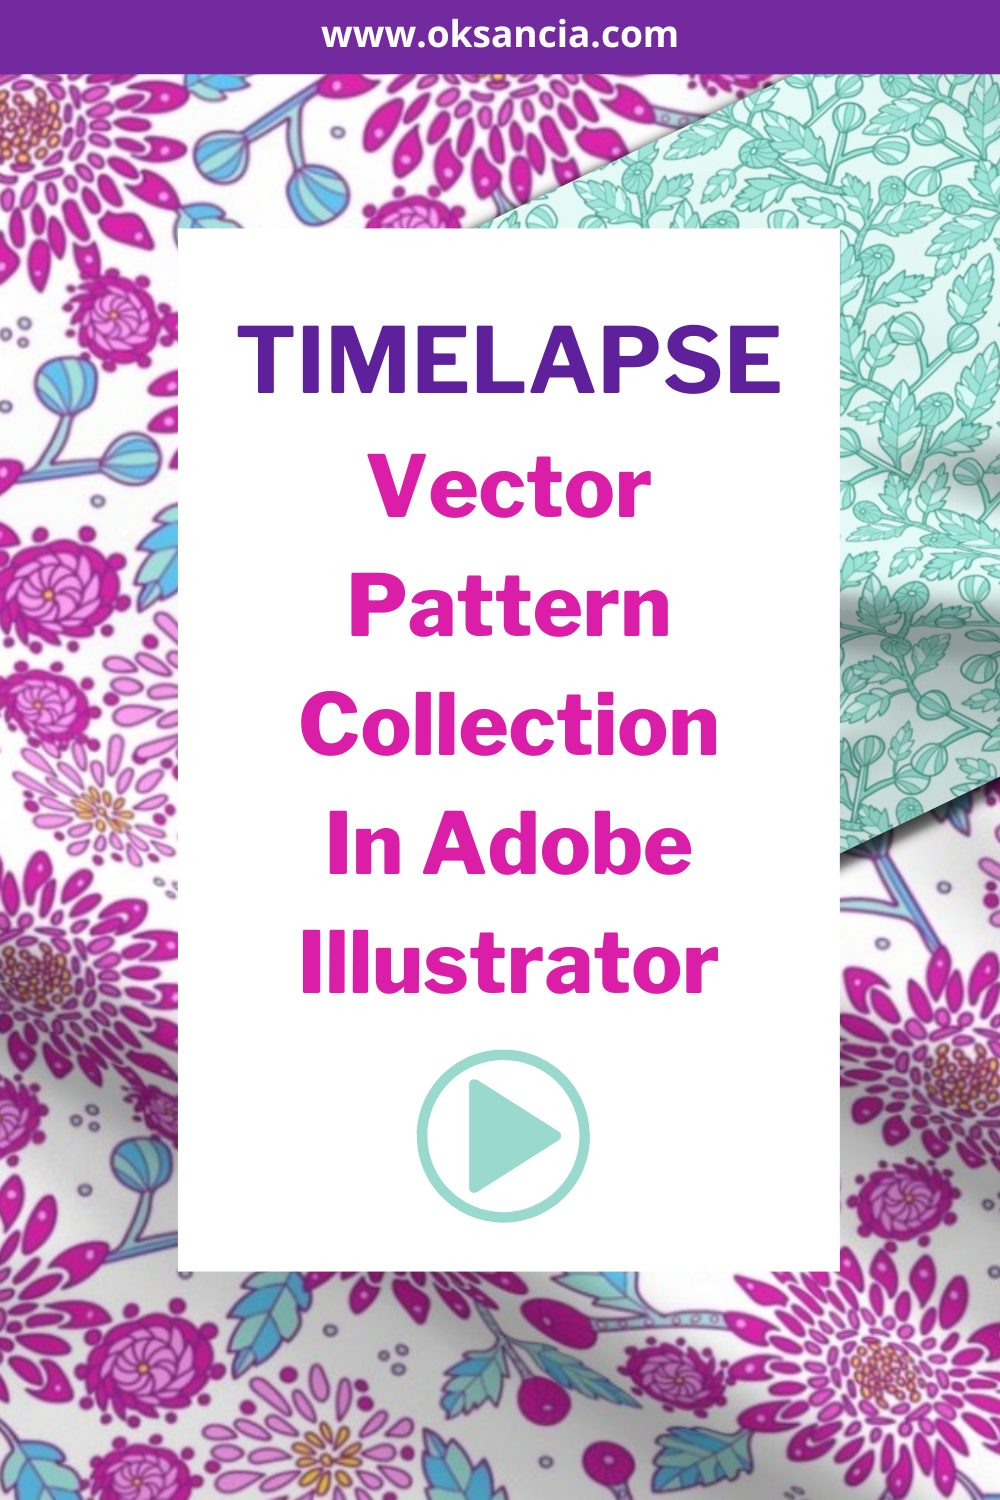 Timelapse: Mums flowers and leaves vector repeat pattern collection in Adobe Illustrator CC